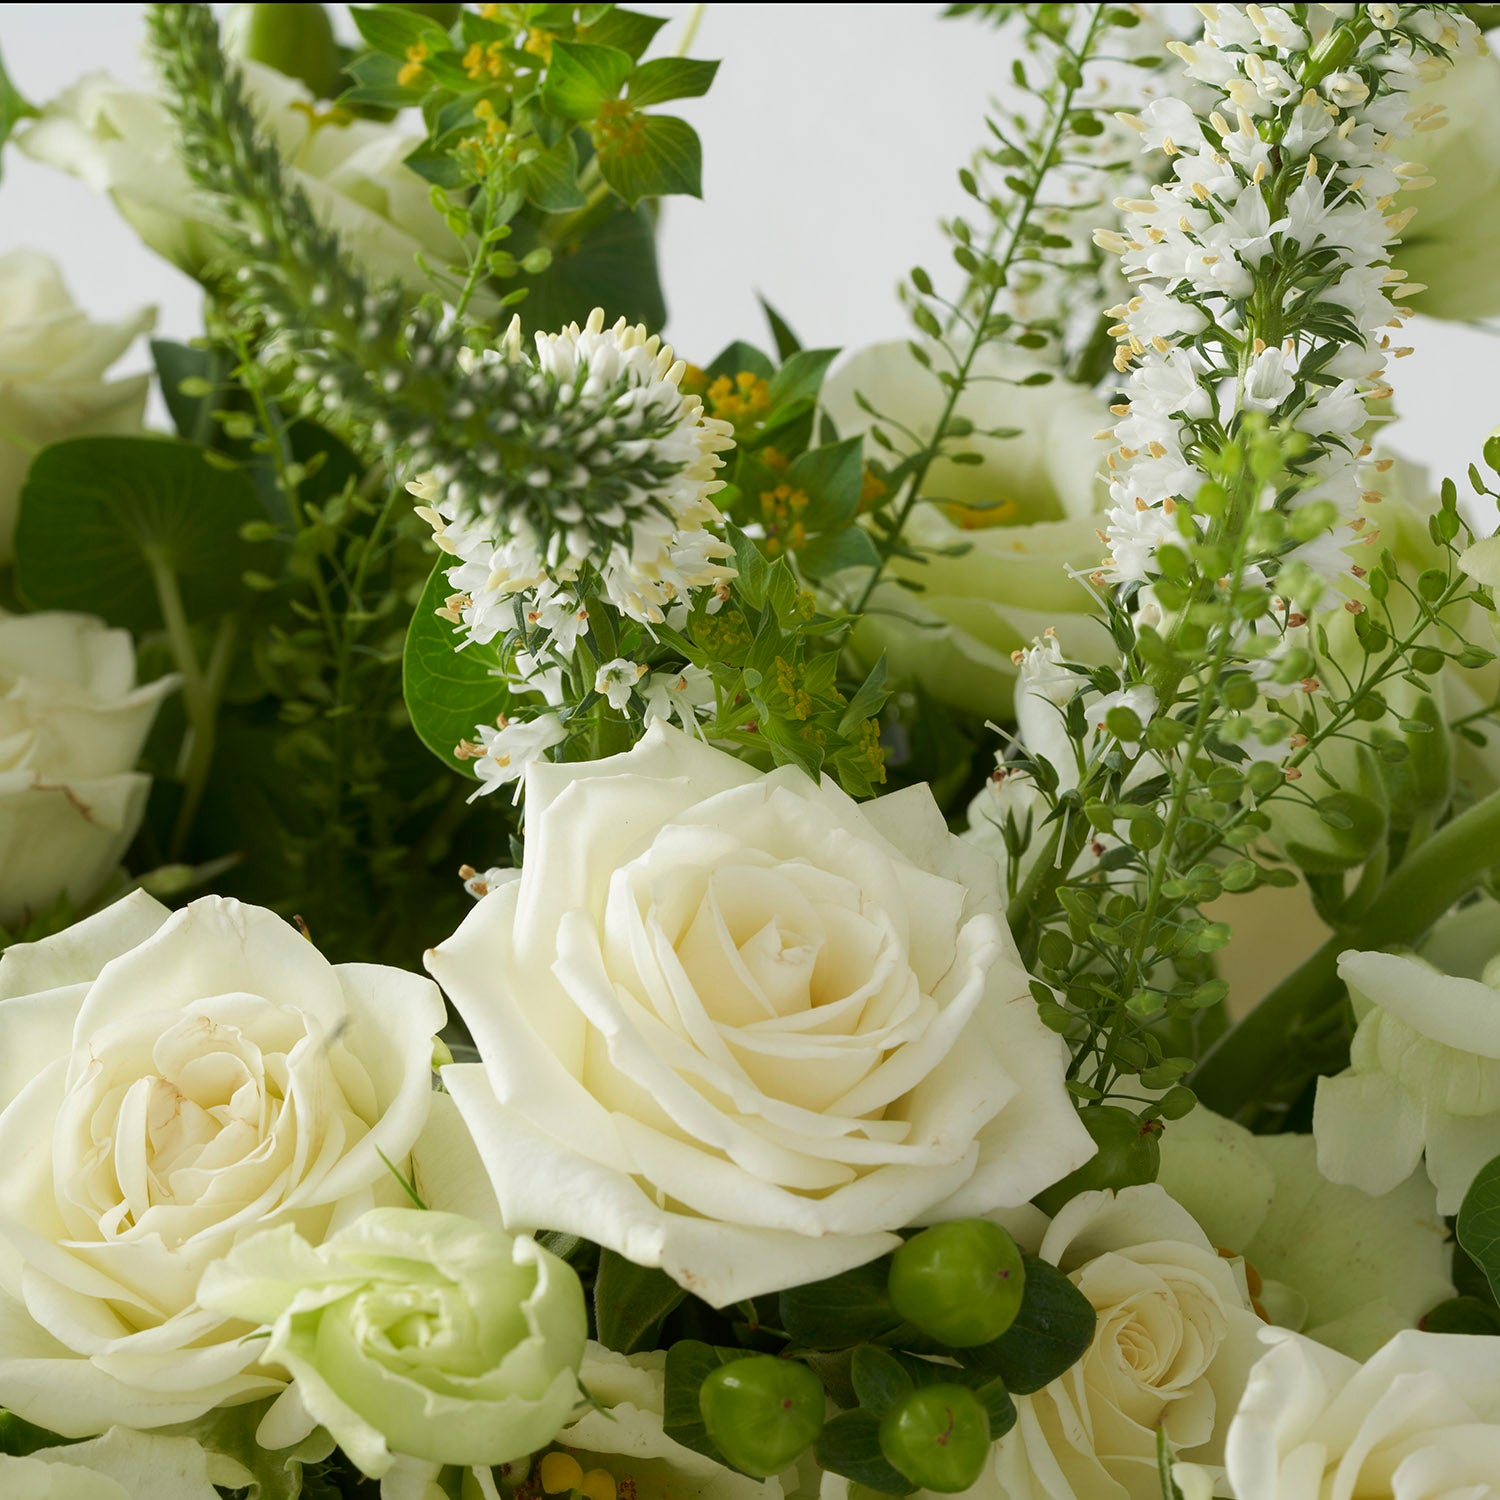 Close up of mostly white roses mixed with other green and white flowers.